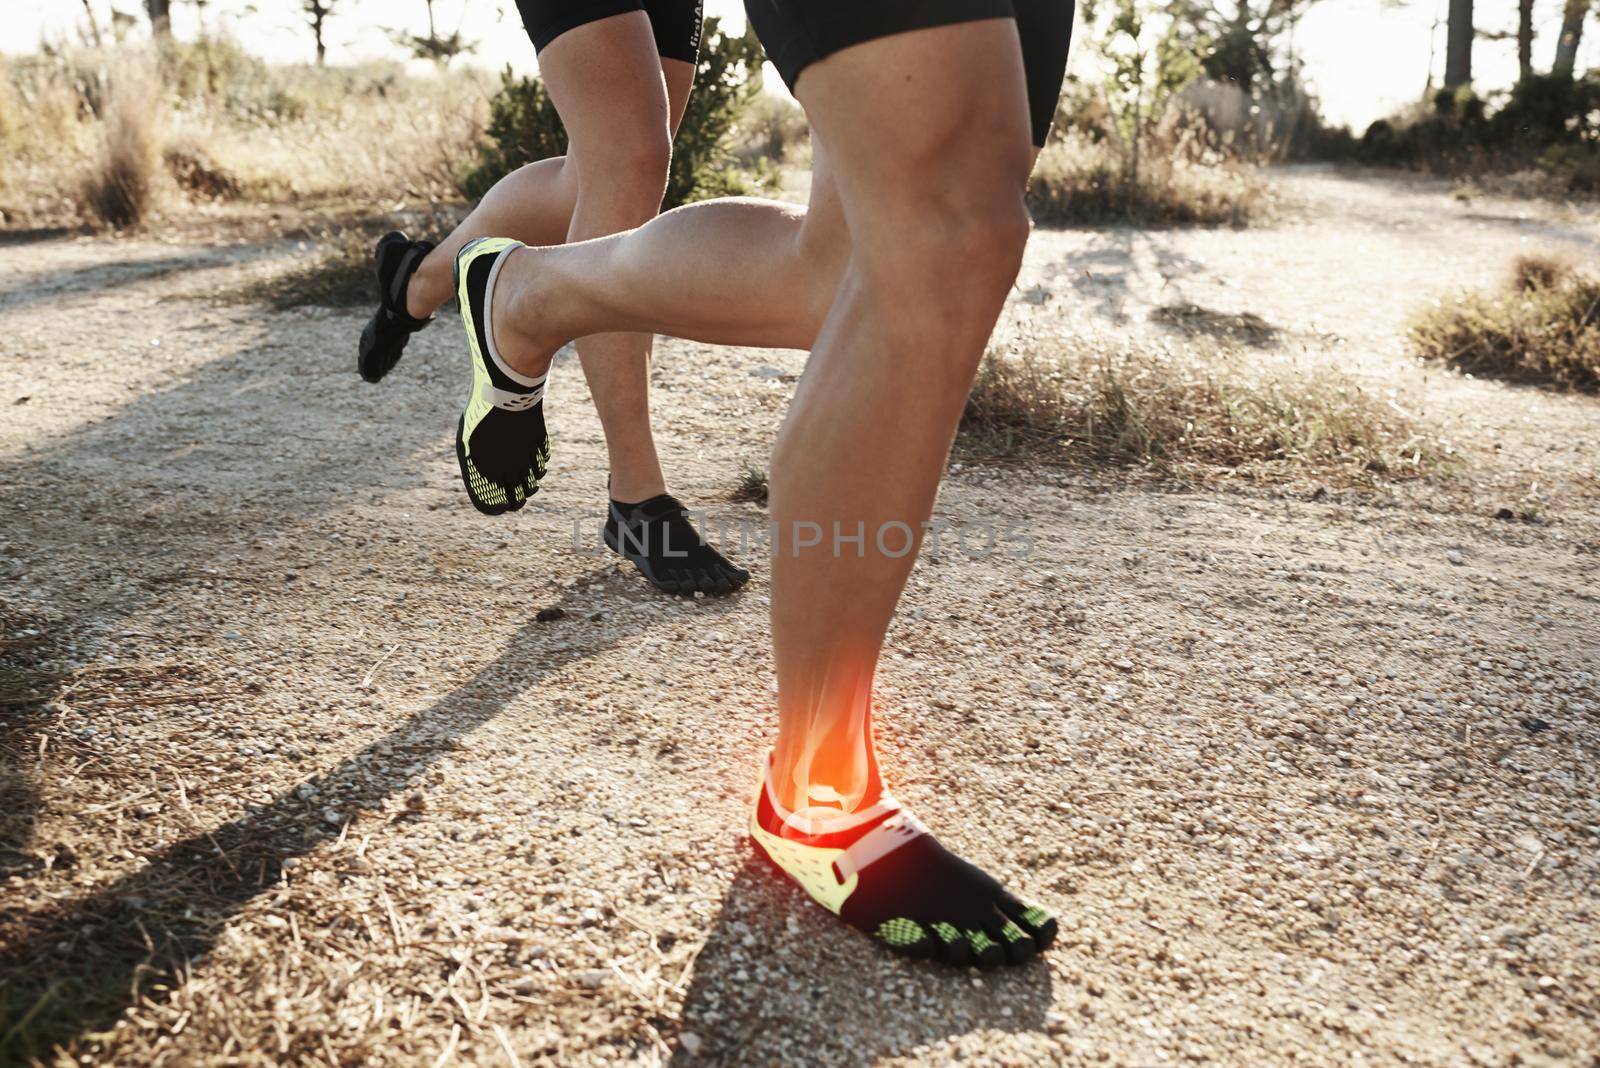 Concept shot of the pressure on ankles when running.